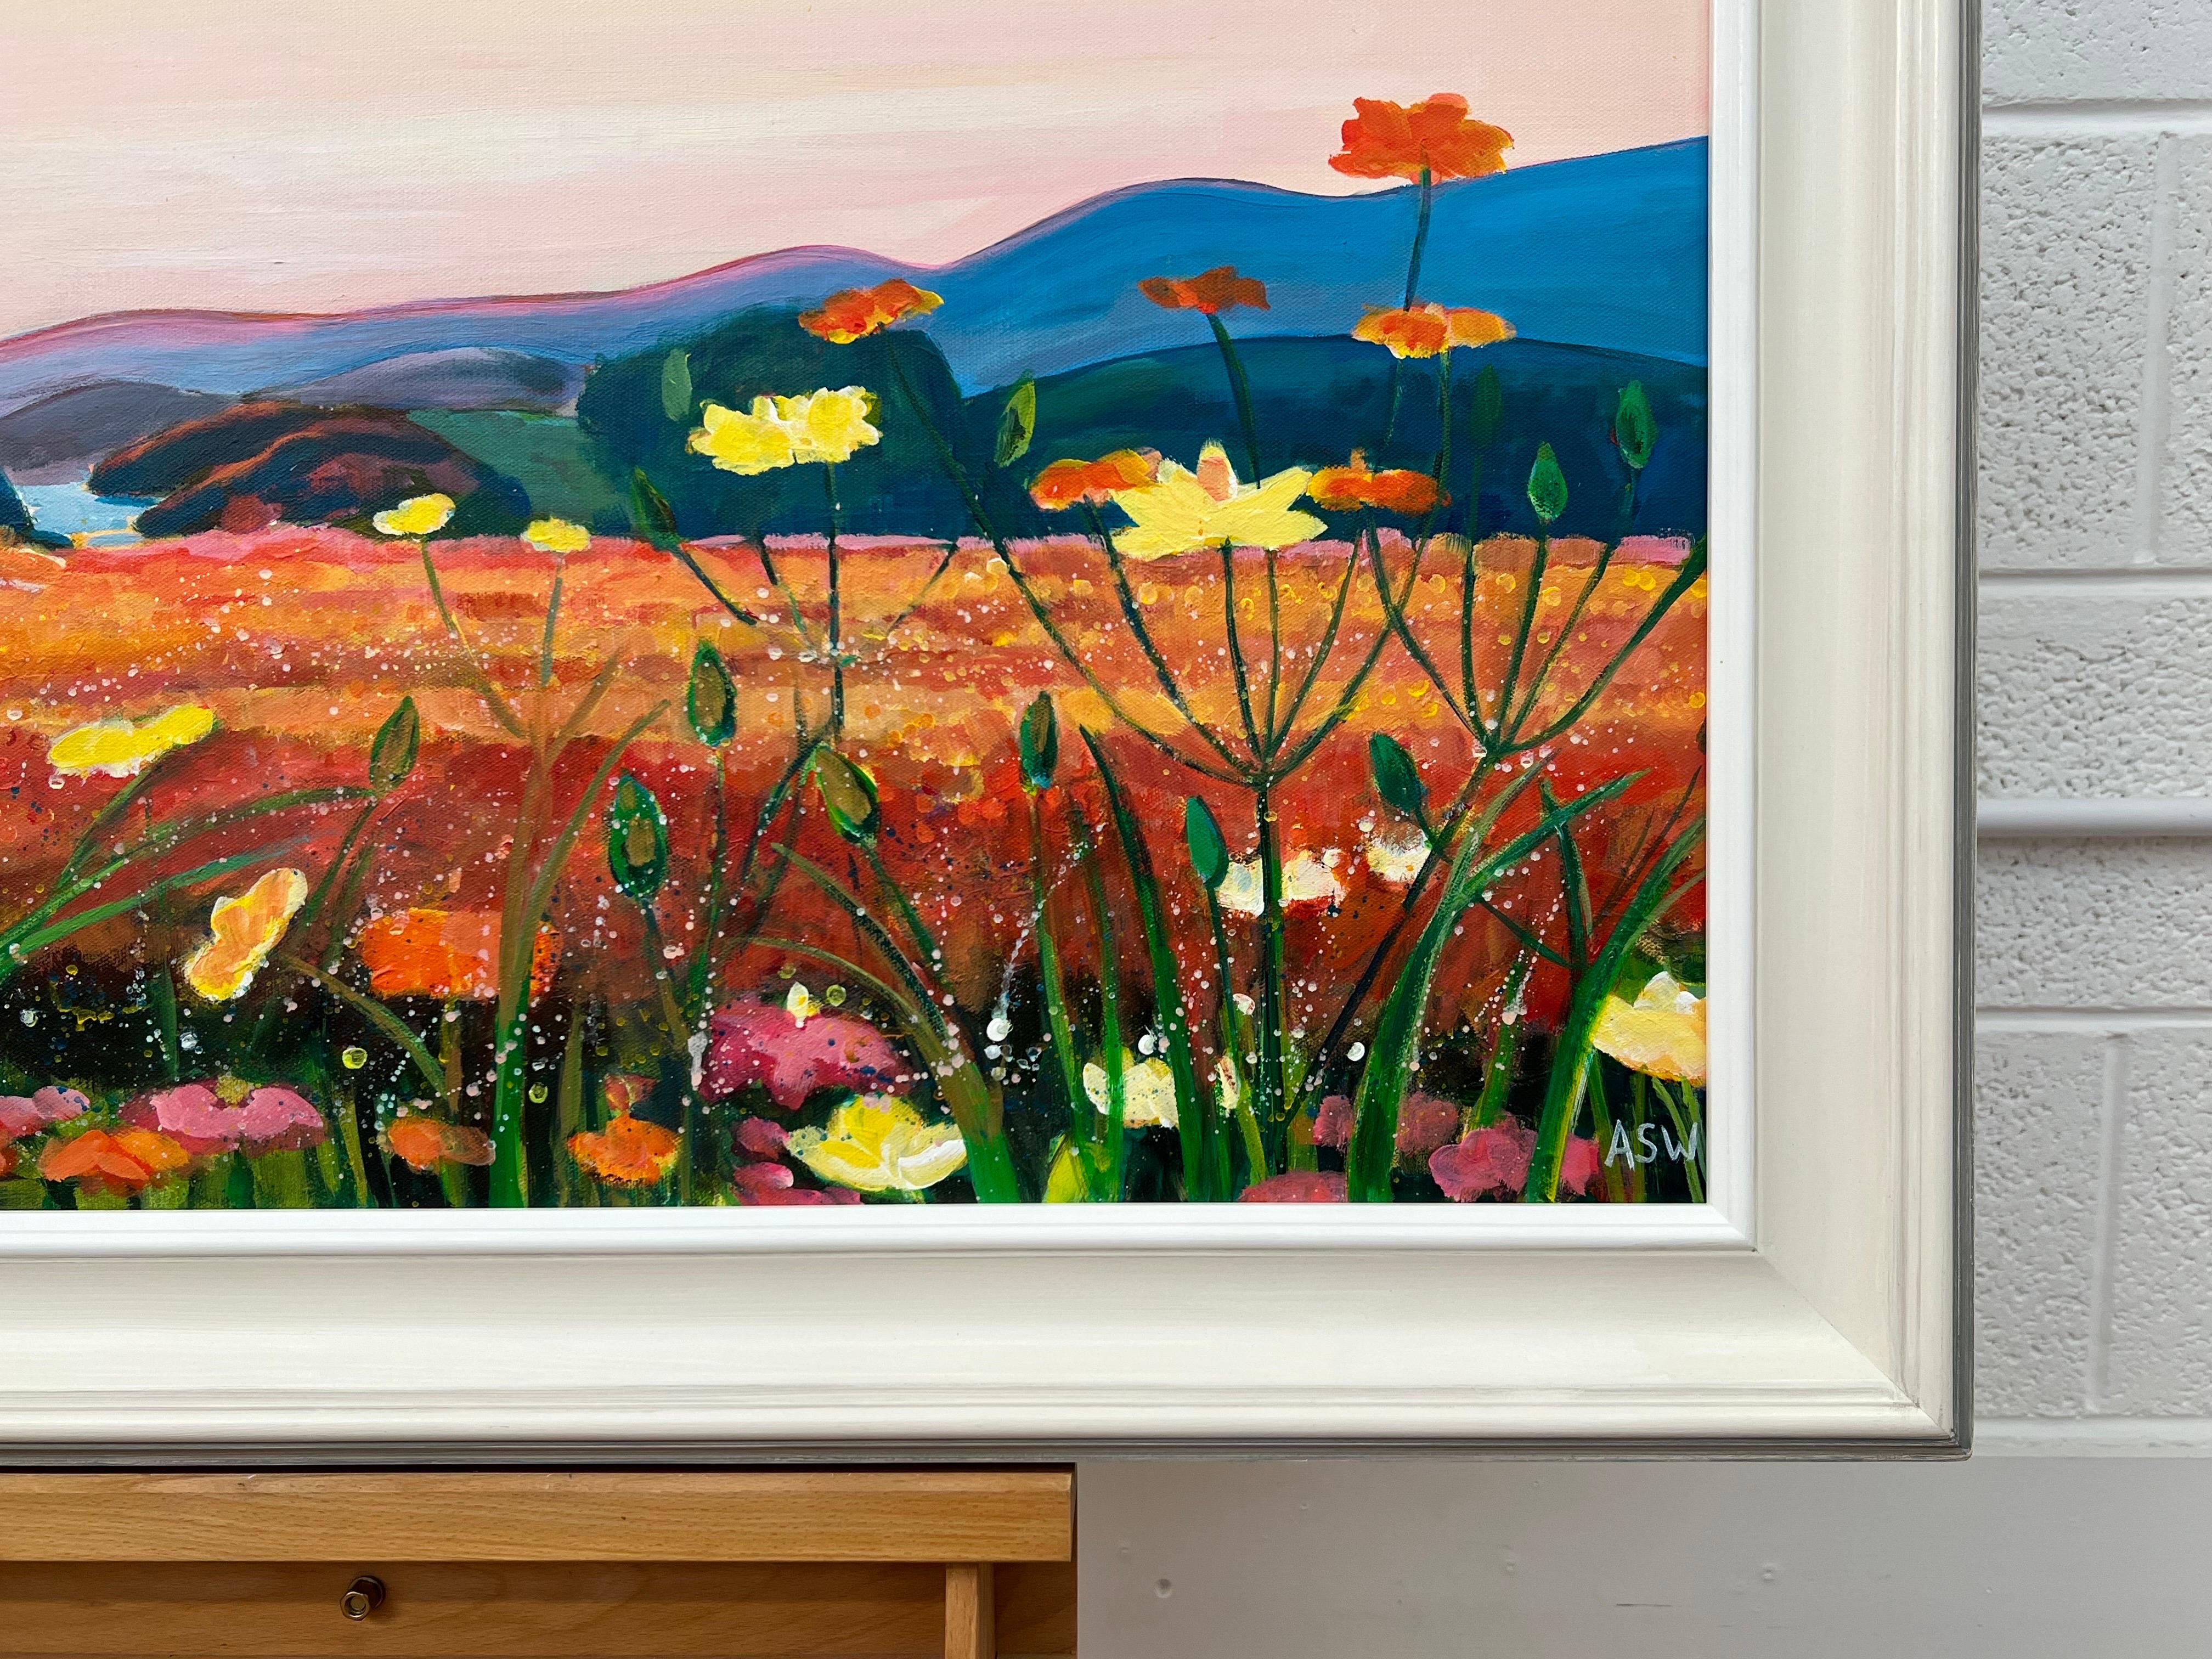 Warm Spanish Sunset Landscape with Wild Flowers by Contemporary British Artist, Angela Wakefield. 

Art measures 36 x 24 inches
Frame measures 42 x 30 inches 

Presented in the highest quality hand-finished off-white Frinton moulding.

Angela